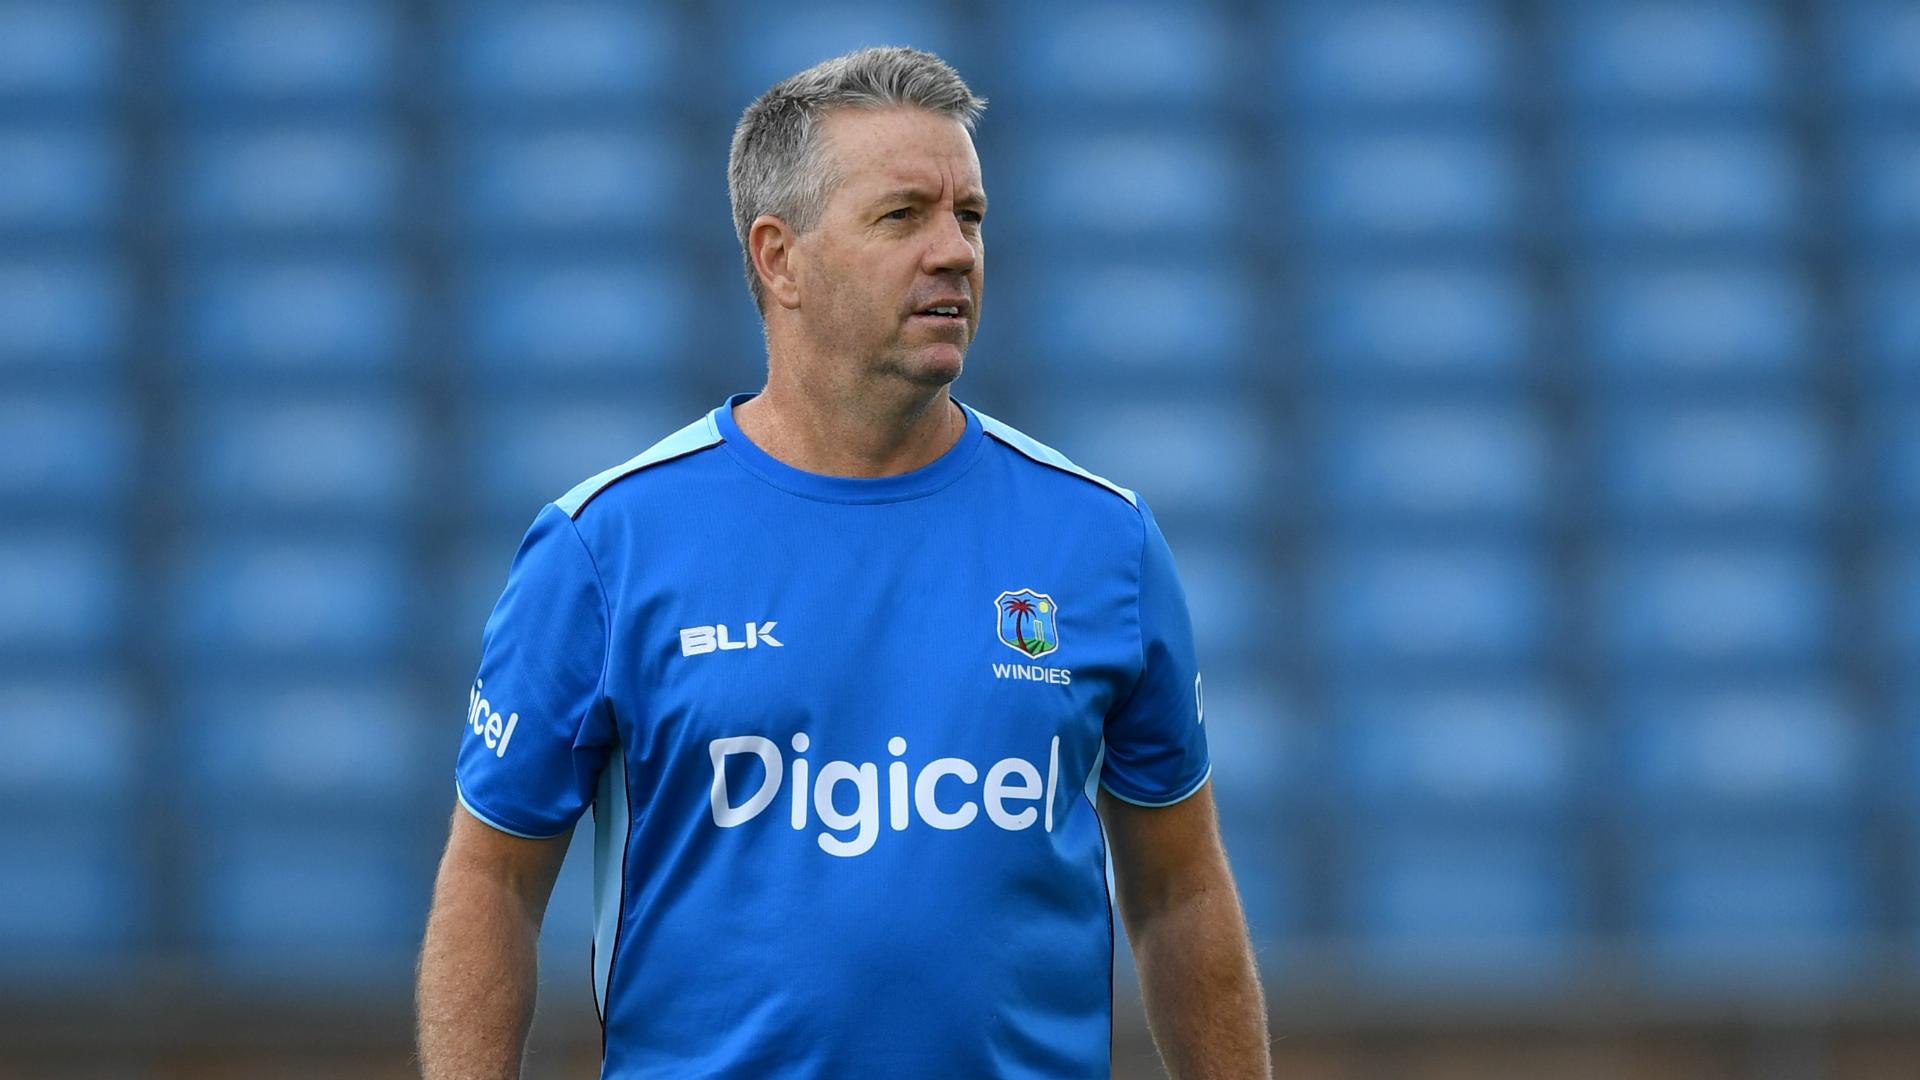 Stuart Law will miss two matches after the West Indies coach made "inappropriate comments" to umpires during last week's Test against India.